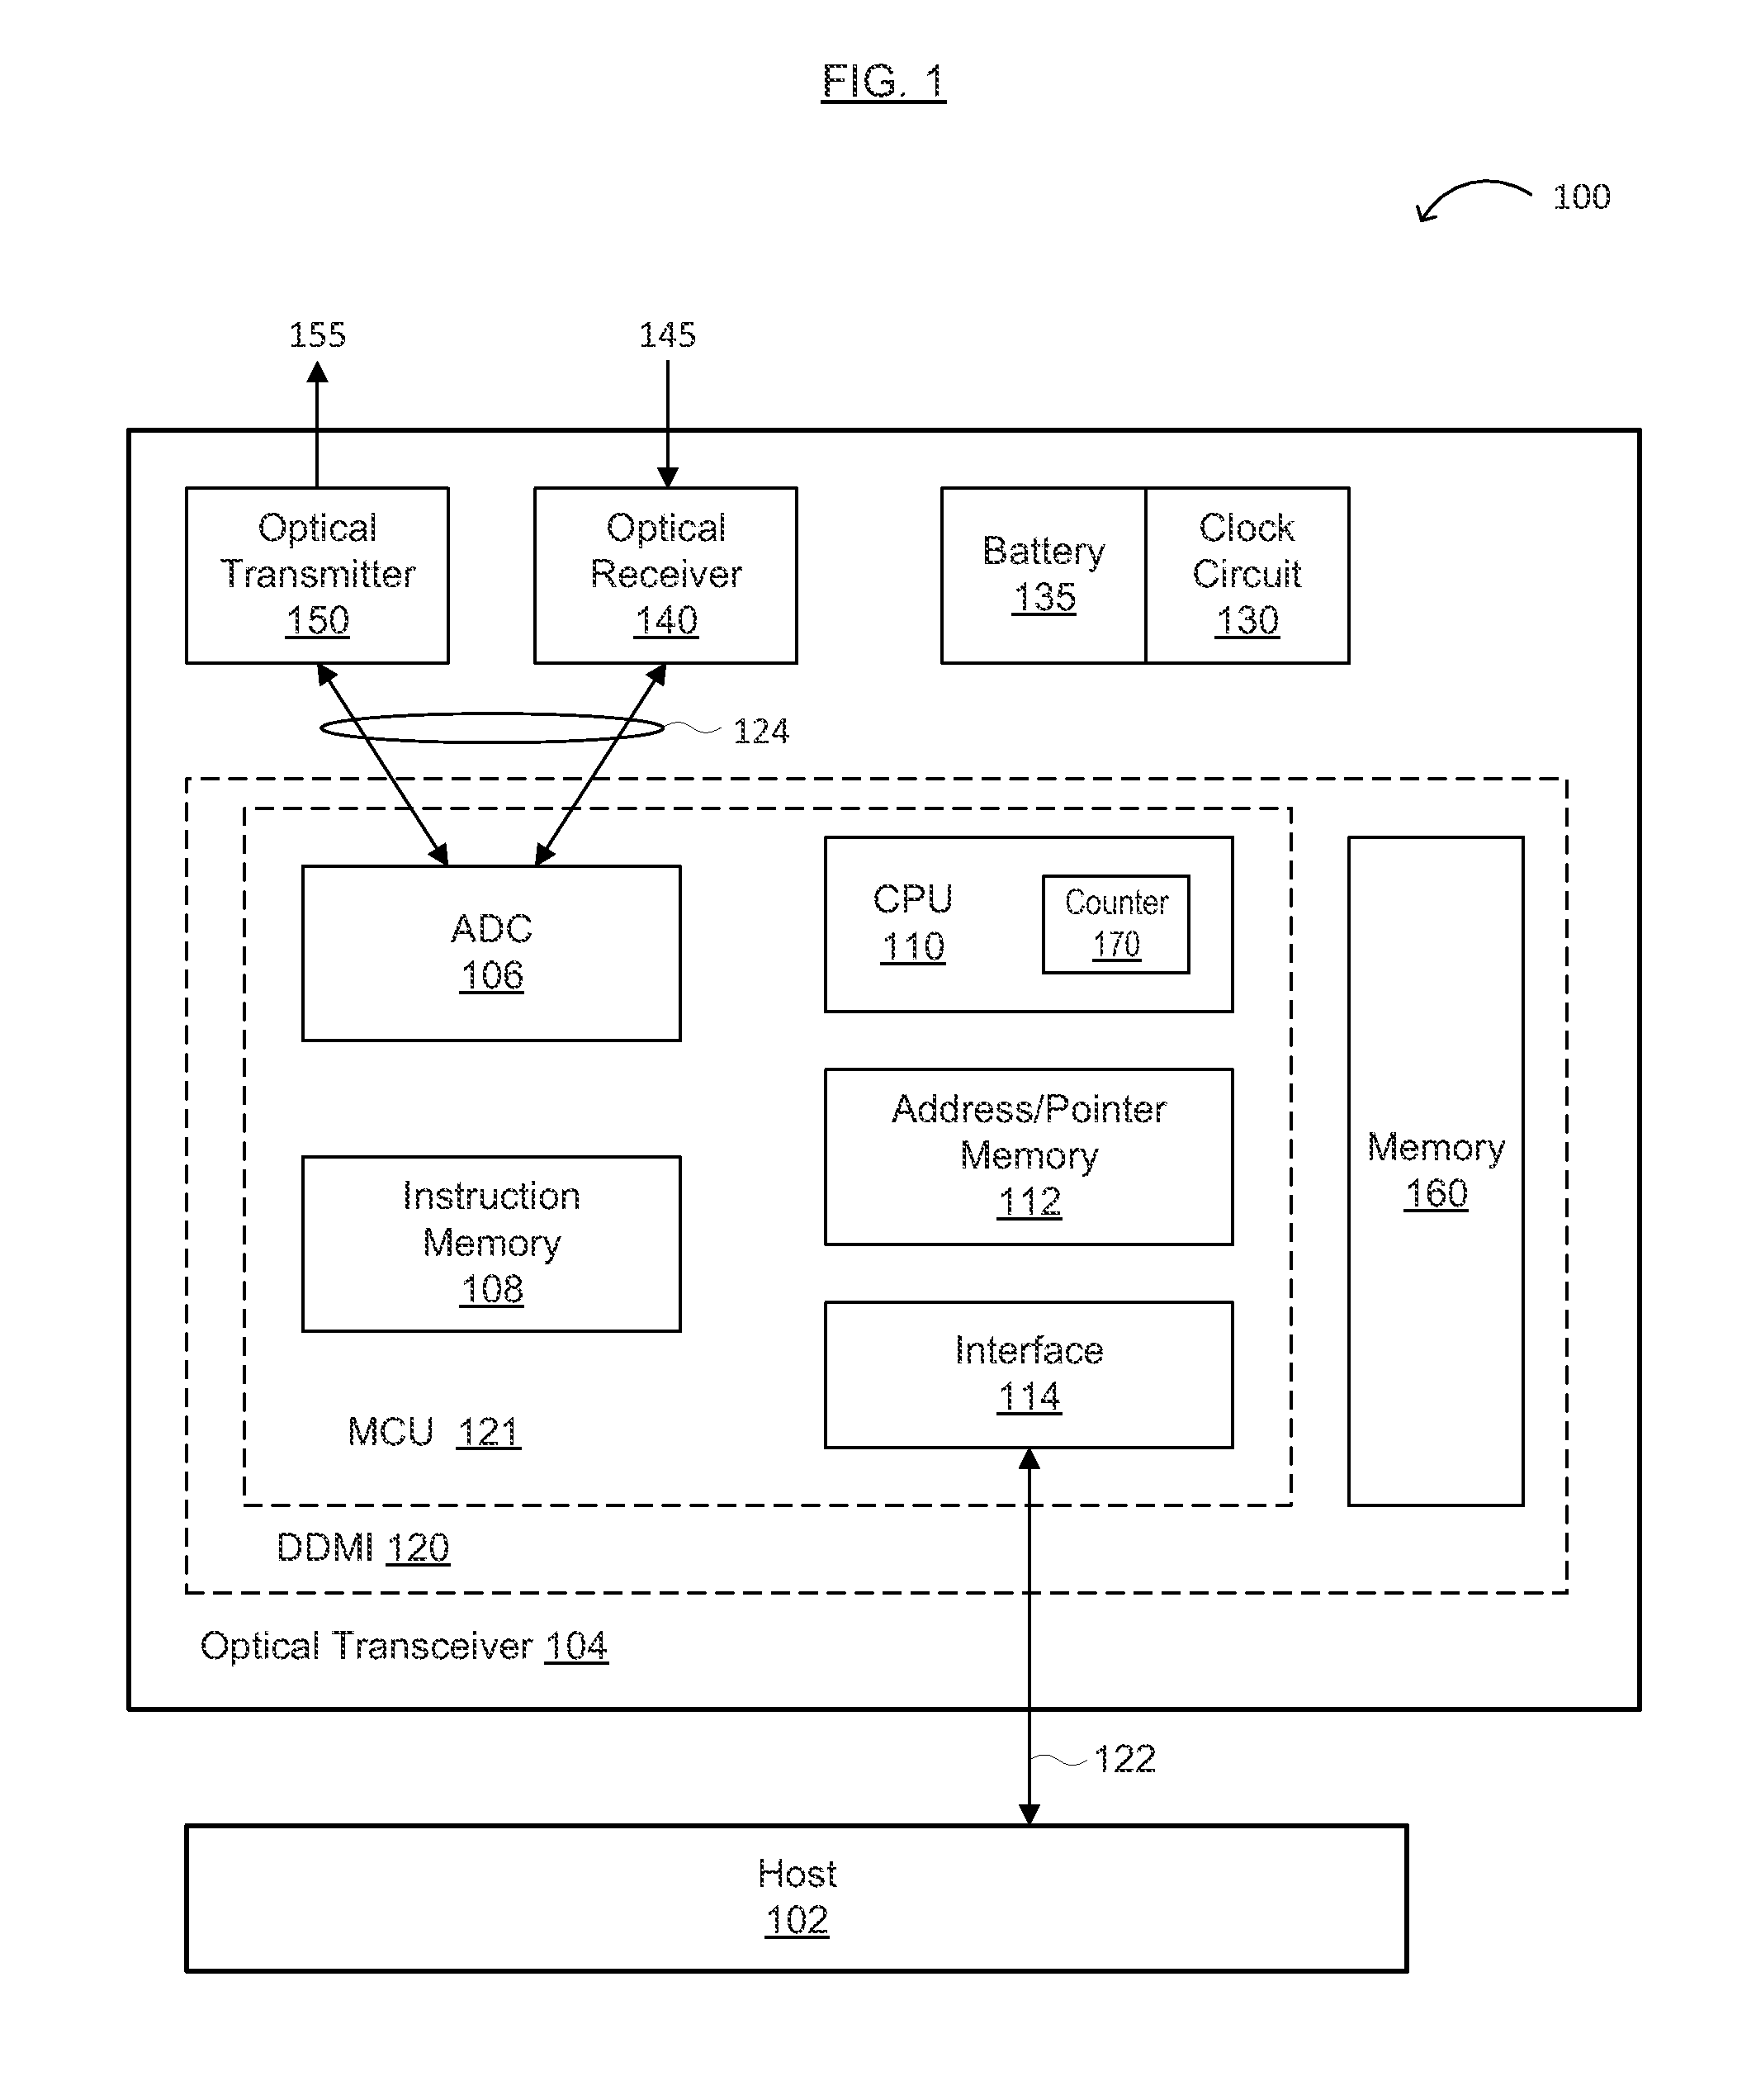 Status monitoring, storage and reporting for optical transceivers by tracking operating parameter variations